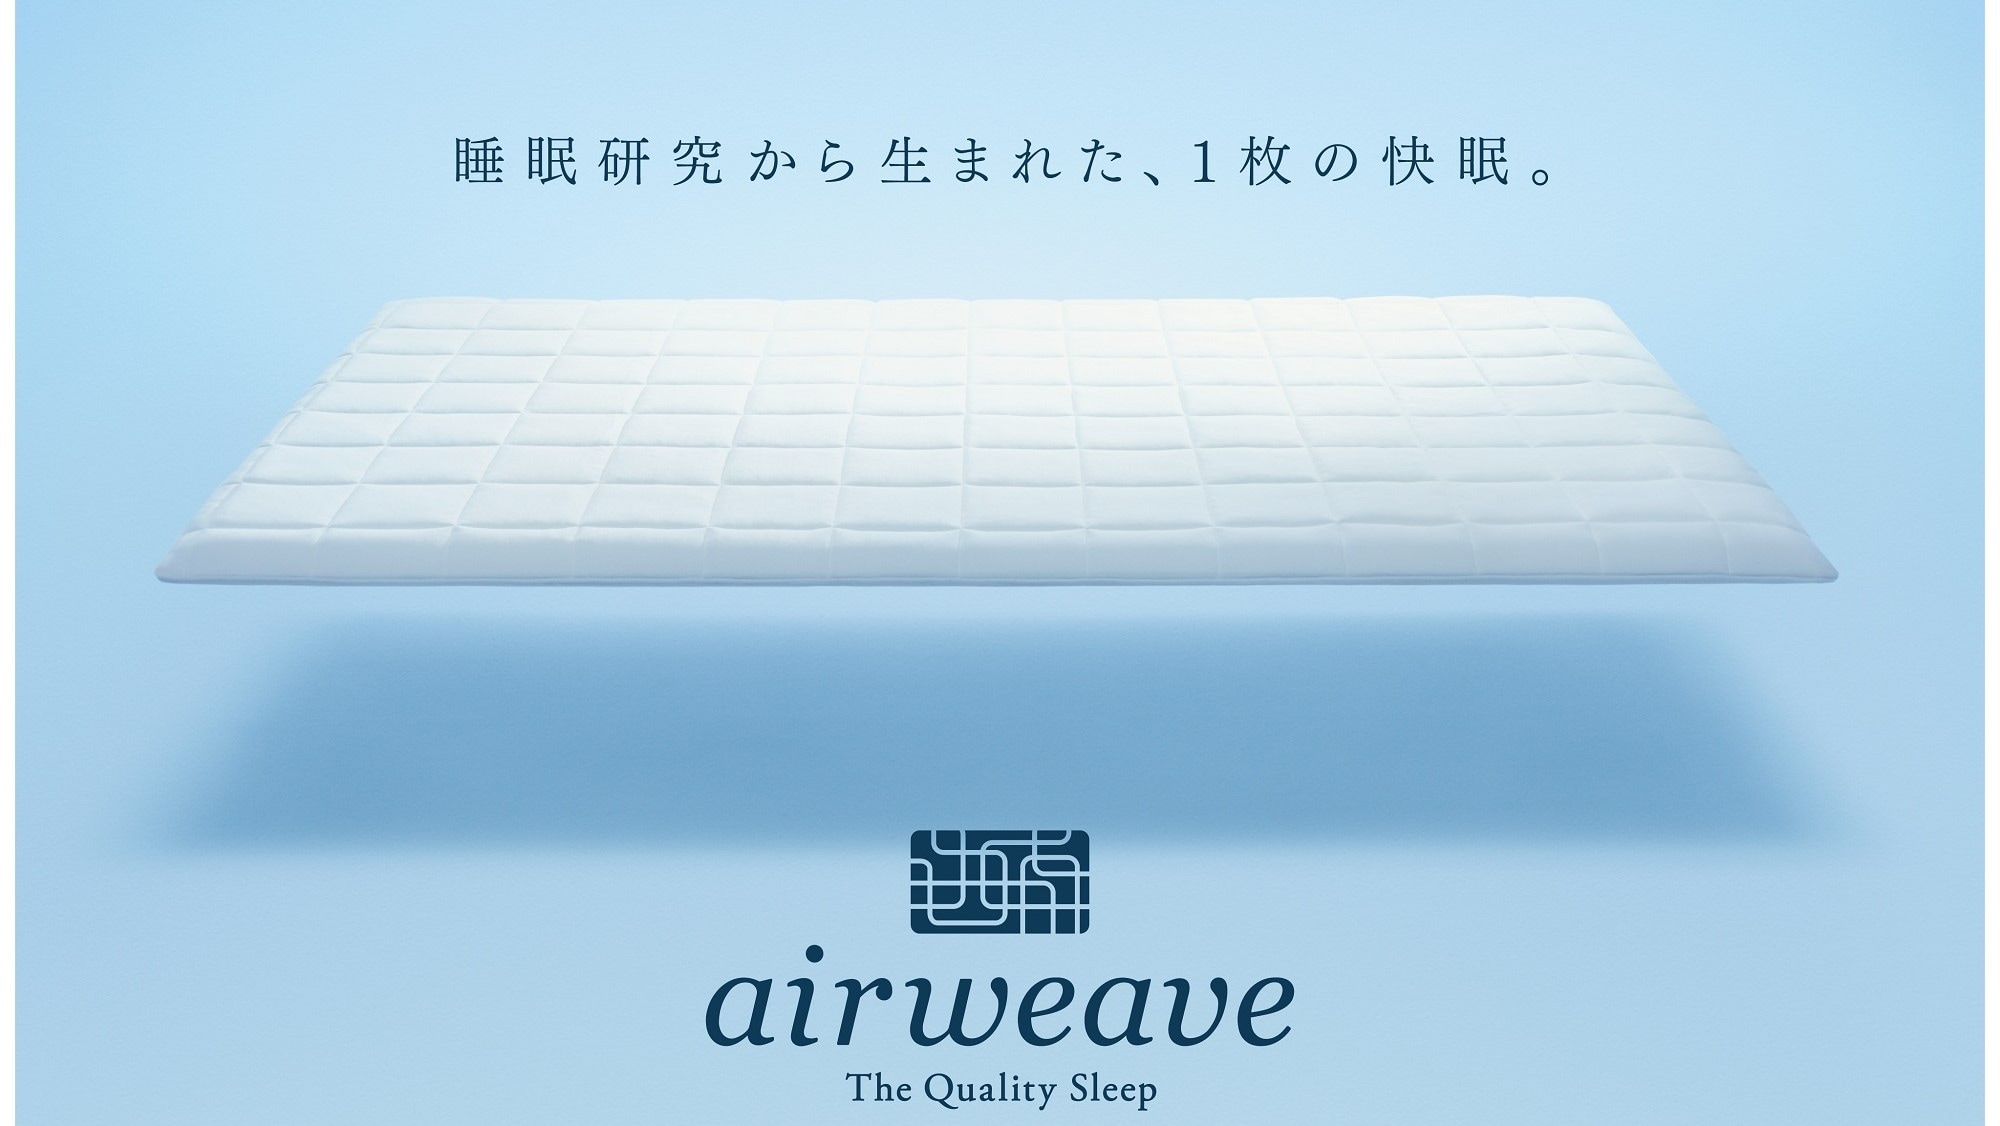 [Airweave] Airweave mattress that promises a good night's sleep, loved by top athletes (example)